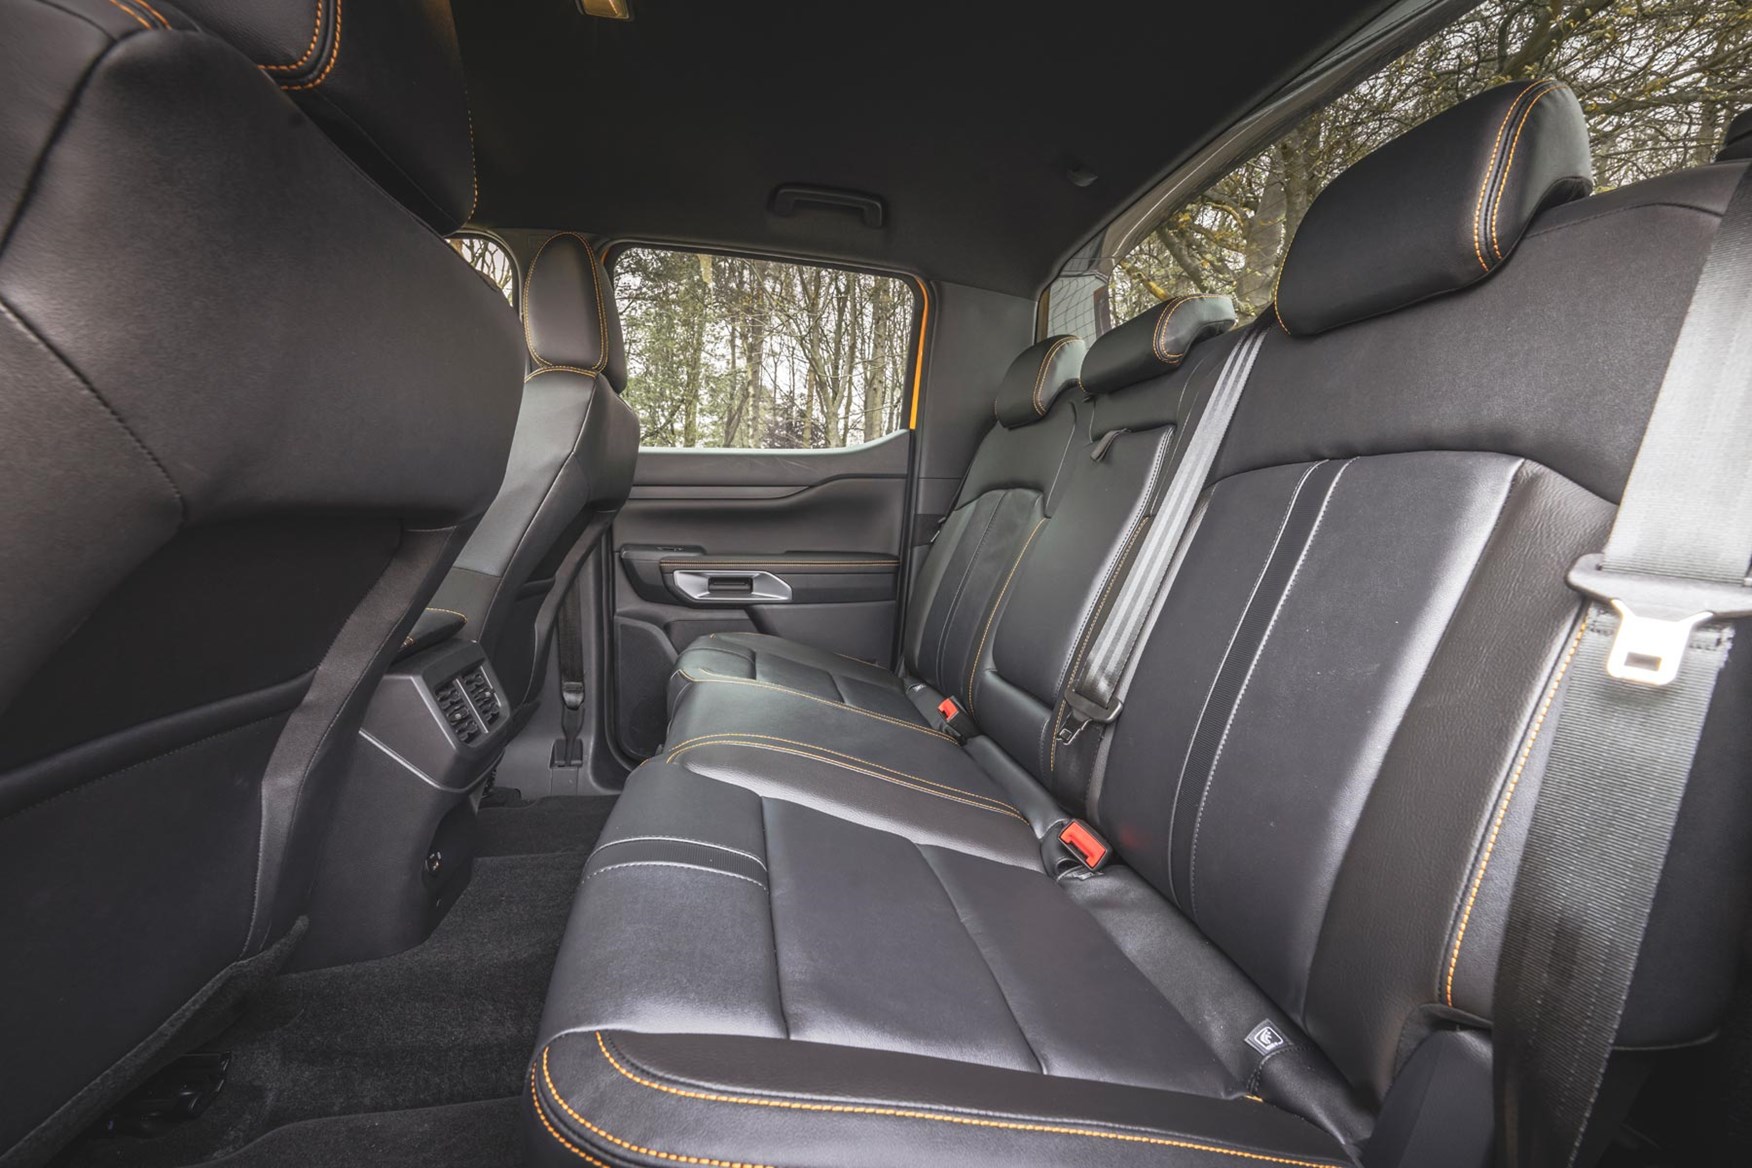 Ford Ranger rear seats get more room than before